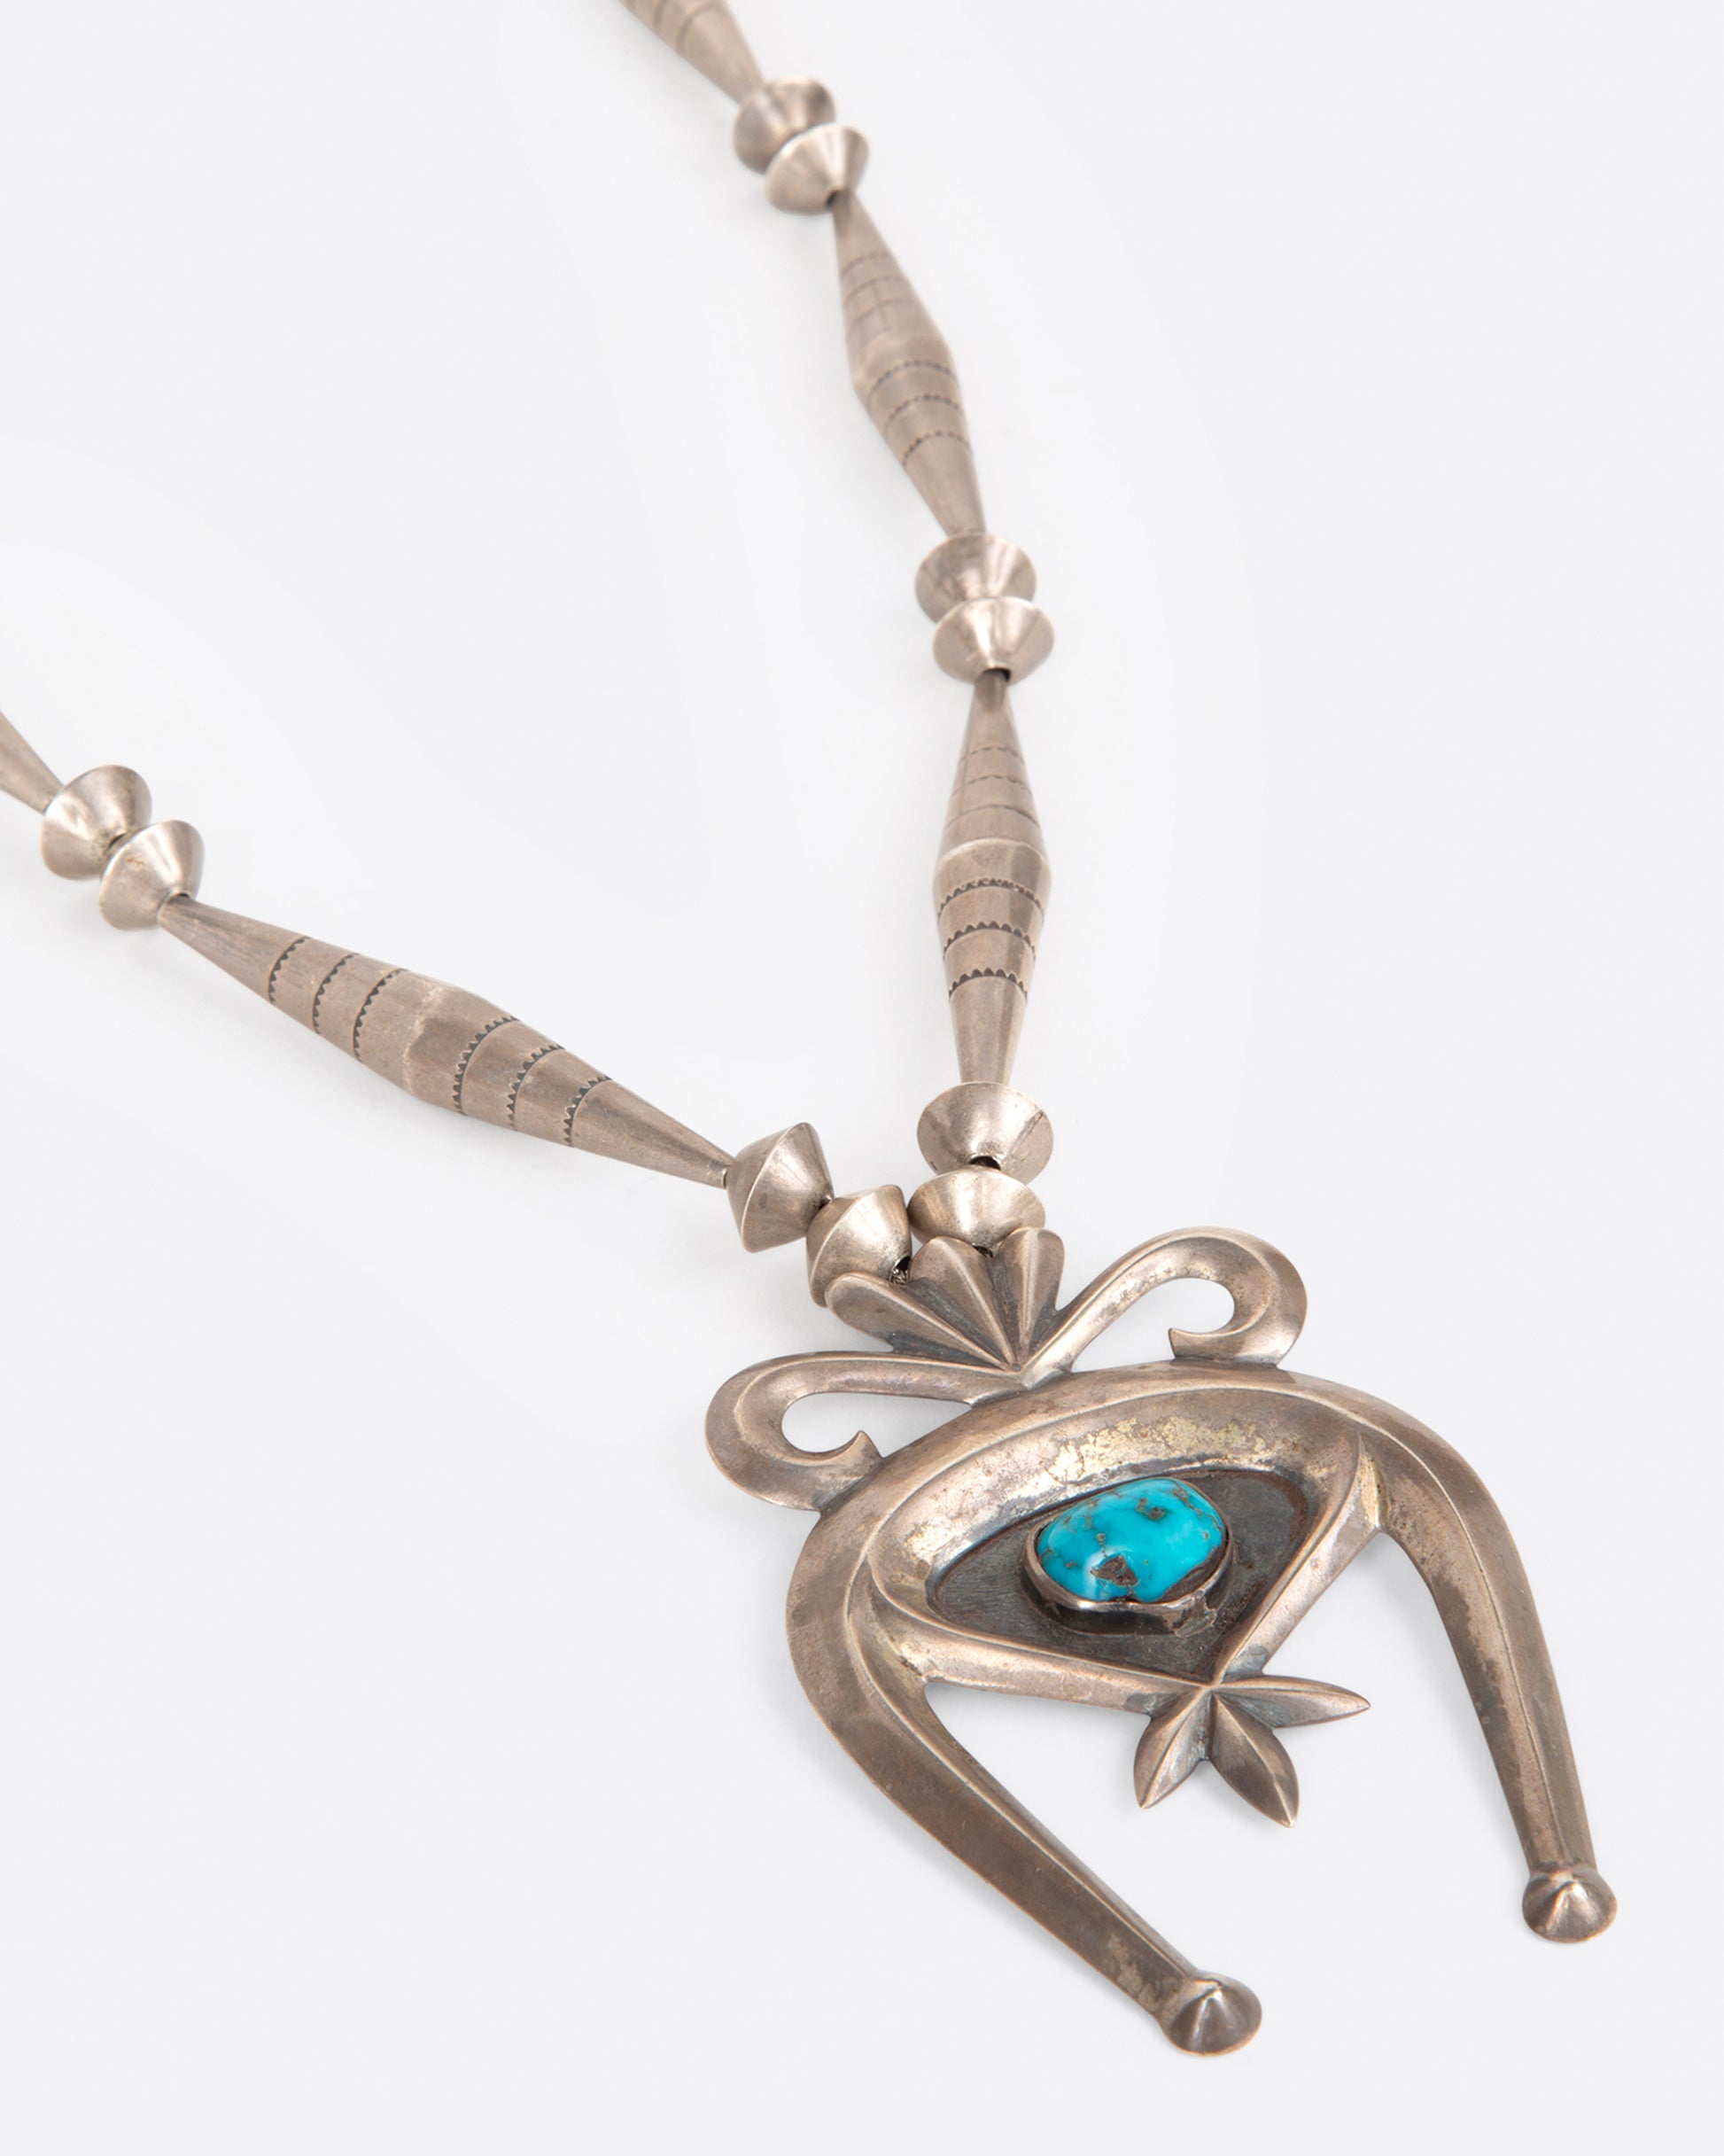 A vintage silver naja necklace with a turquoise stone at the center of the pendant, shown from the side.